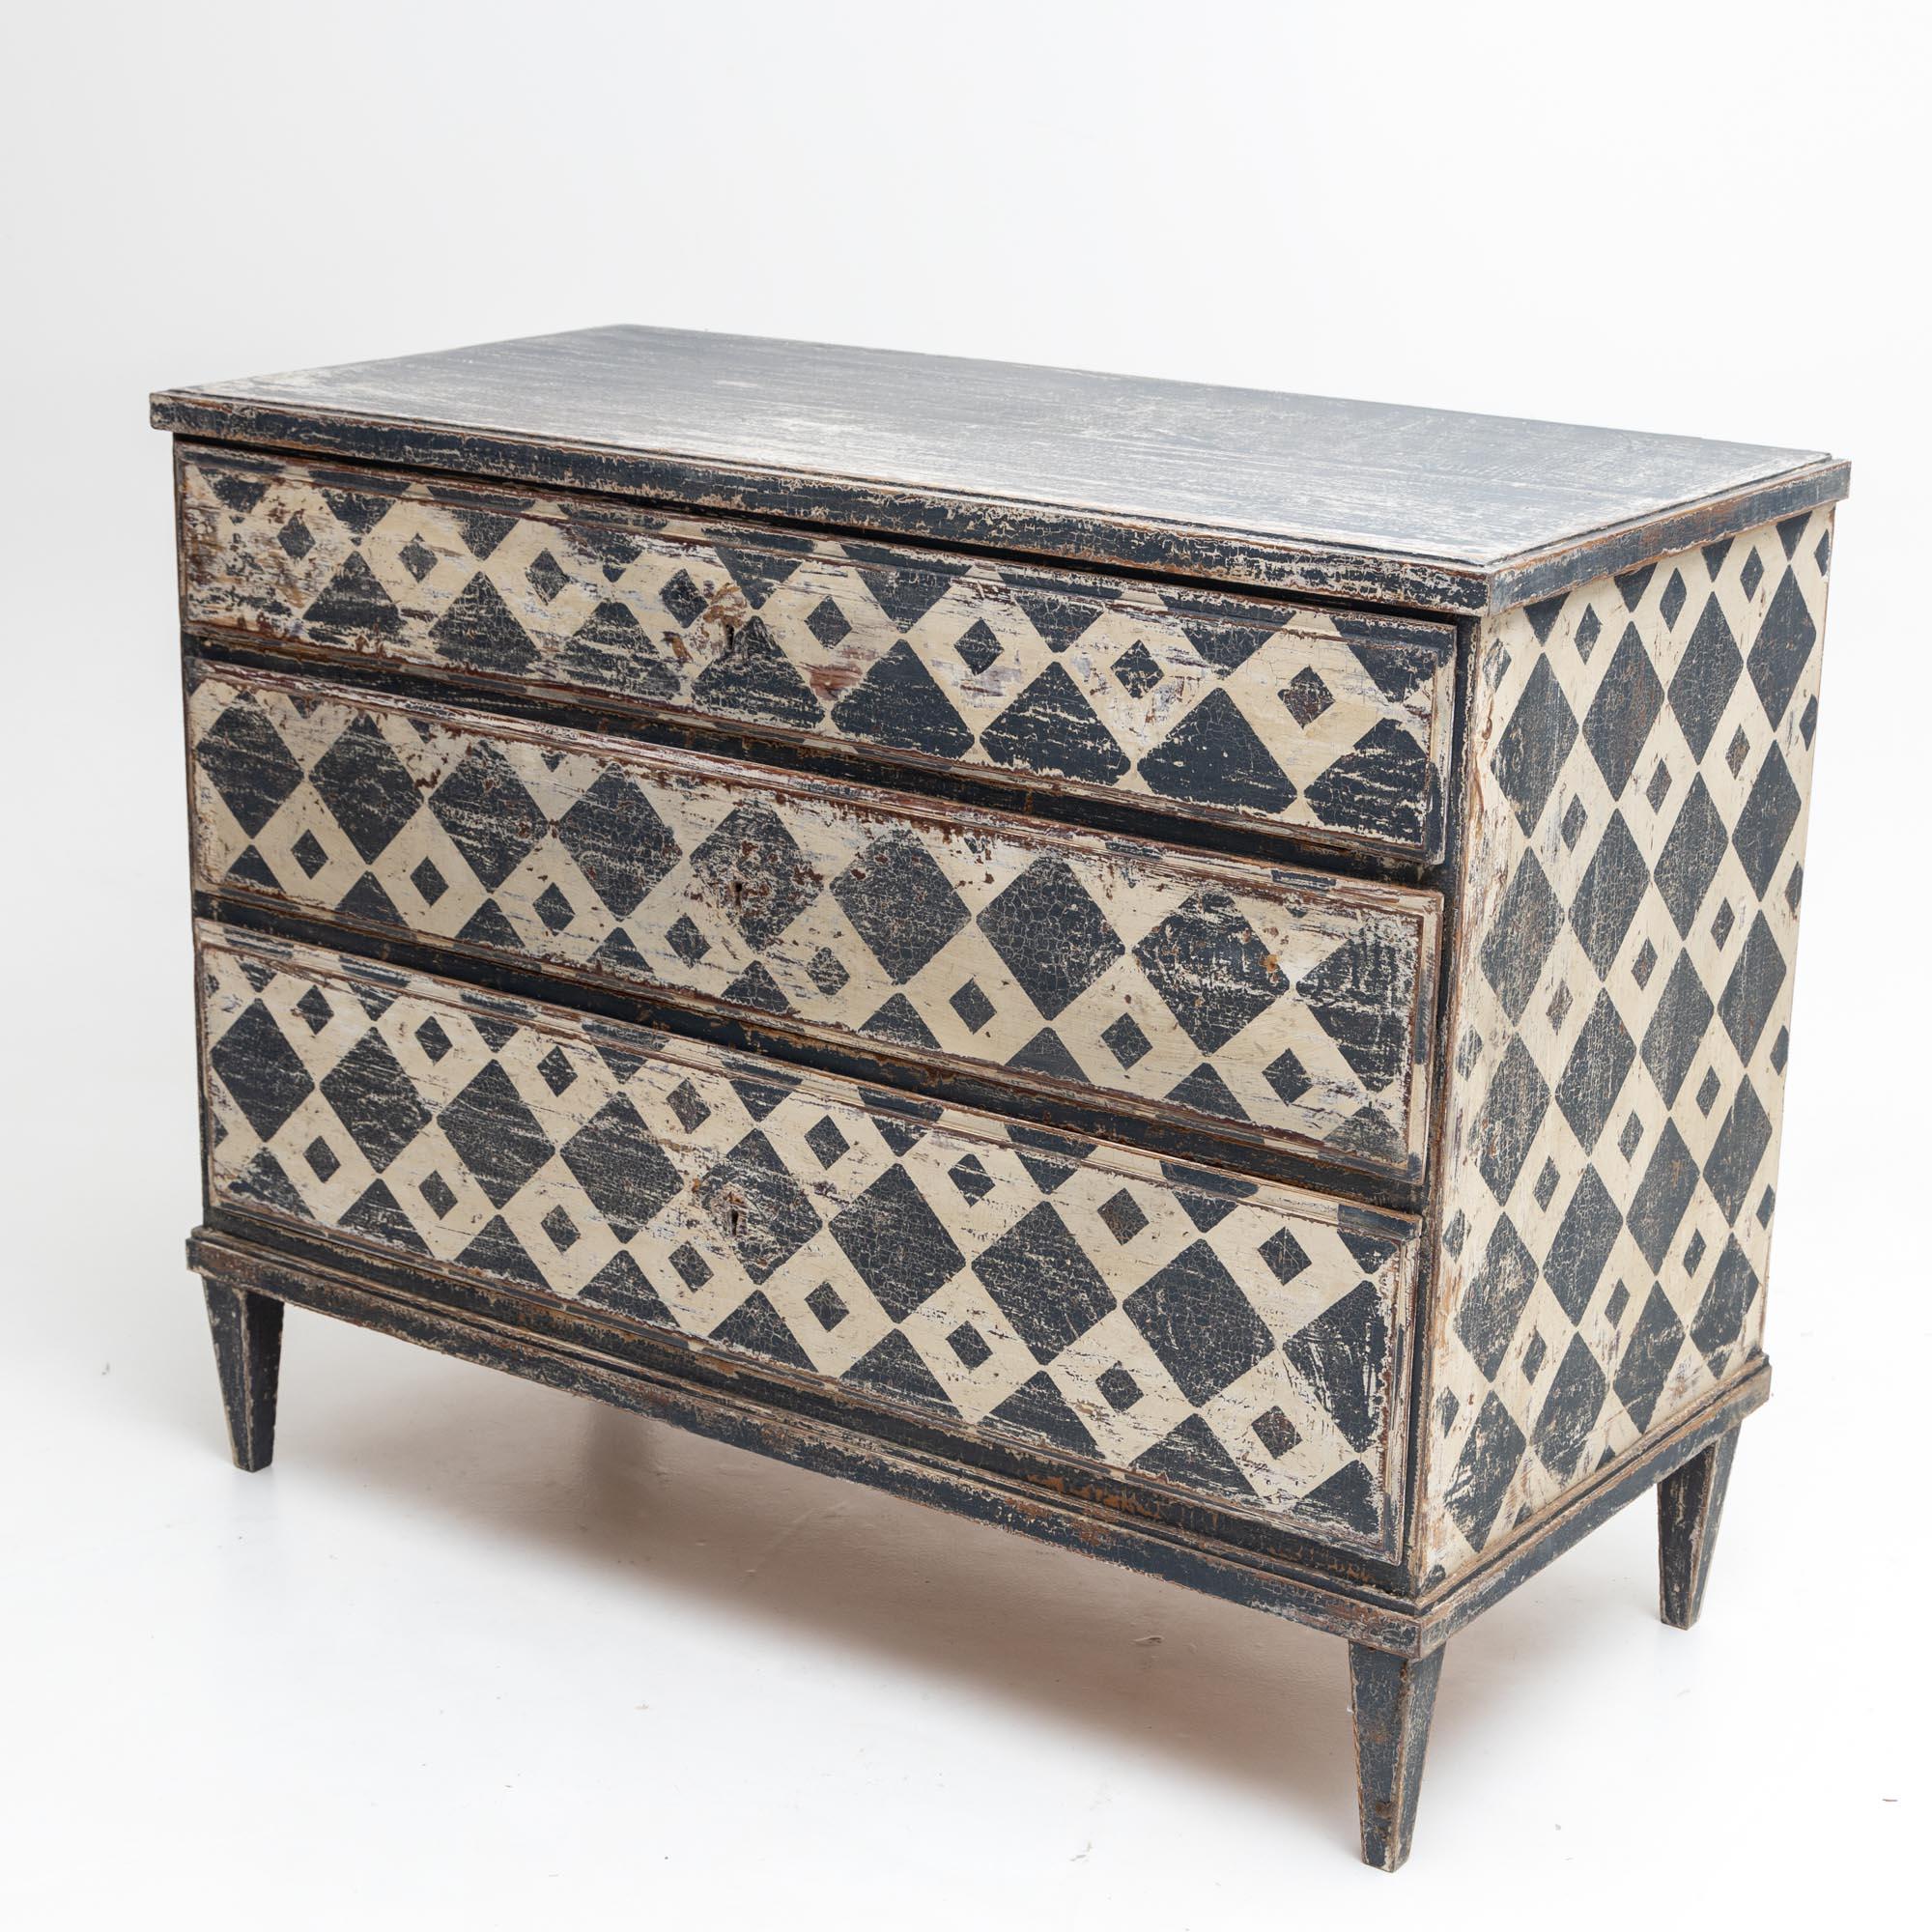 Hand-painted chest of drawers with three drawers and a straight body. This chest of drawers was repainted according to historical models with a diamond pattern in white-grey and patinated in antique style.